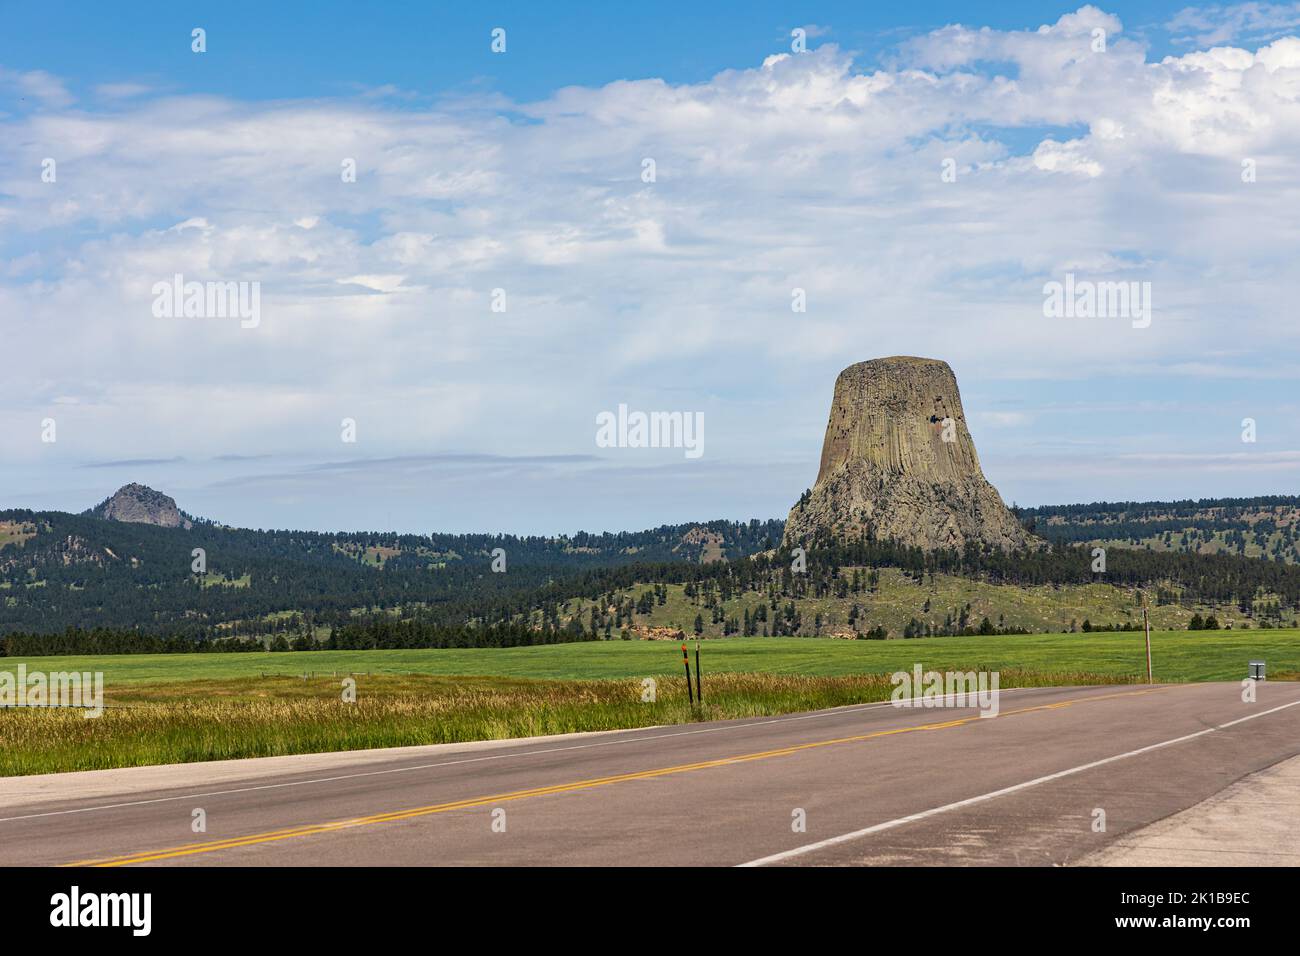 Devils Tower rising above the surrounding landscape, Wyoming, USA Stock Photo